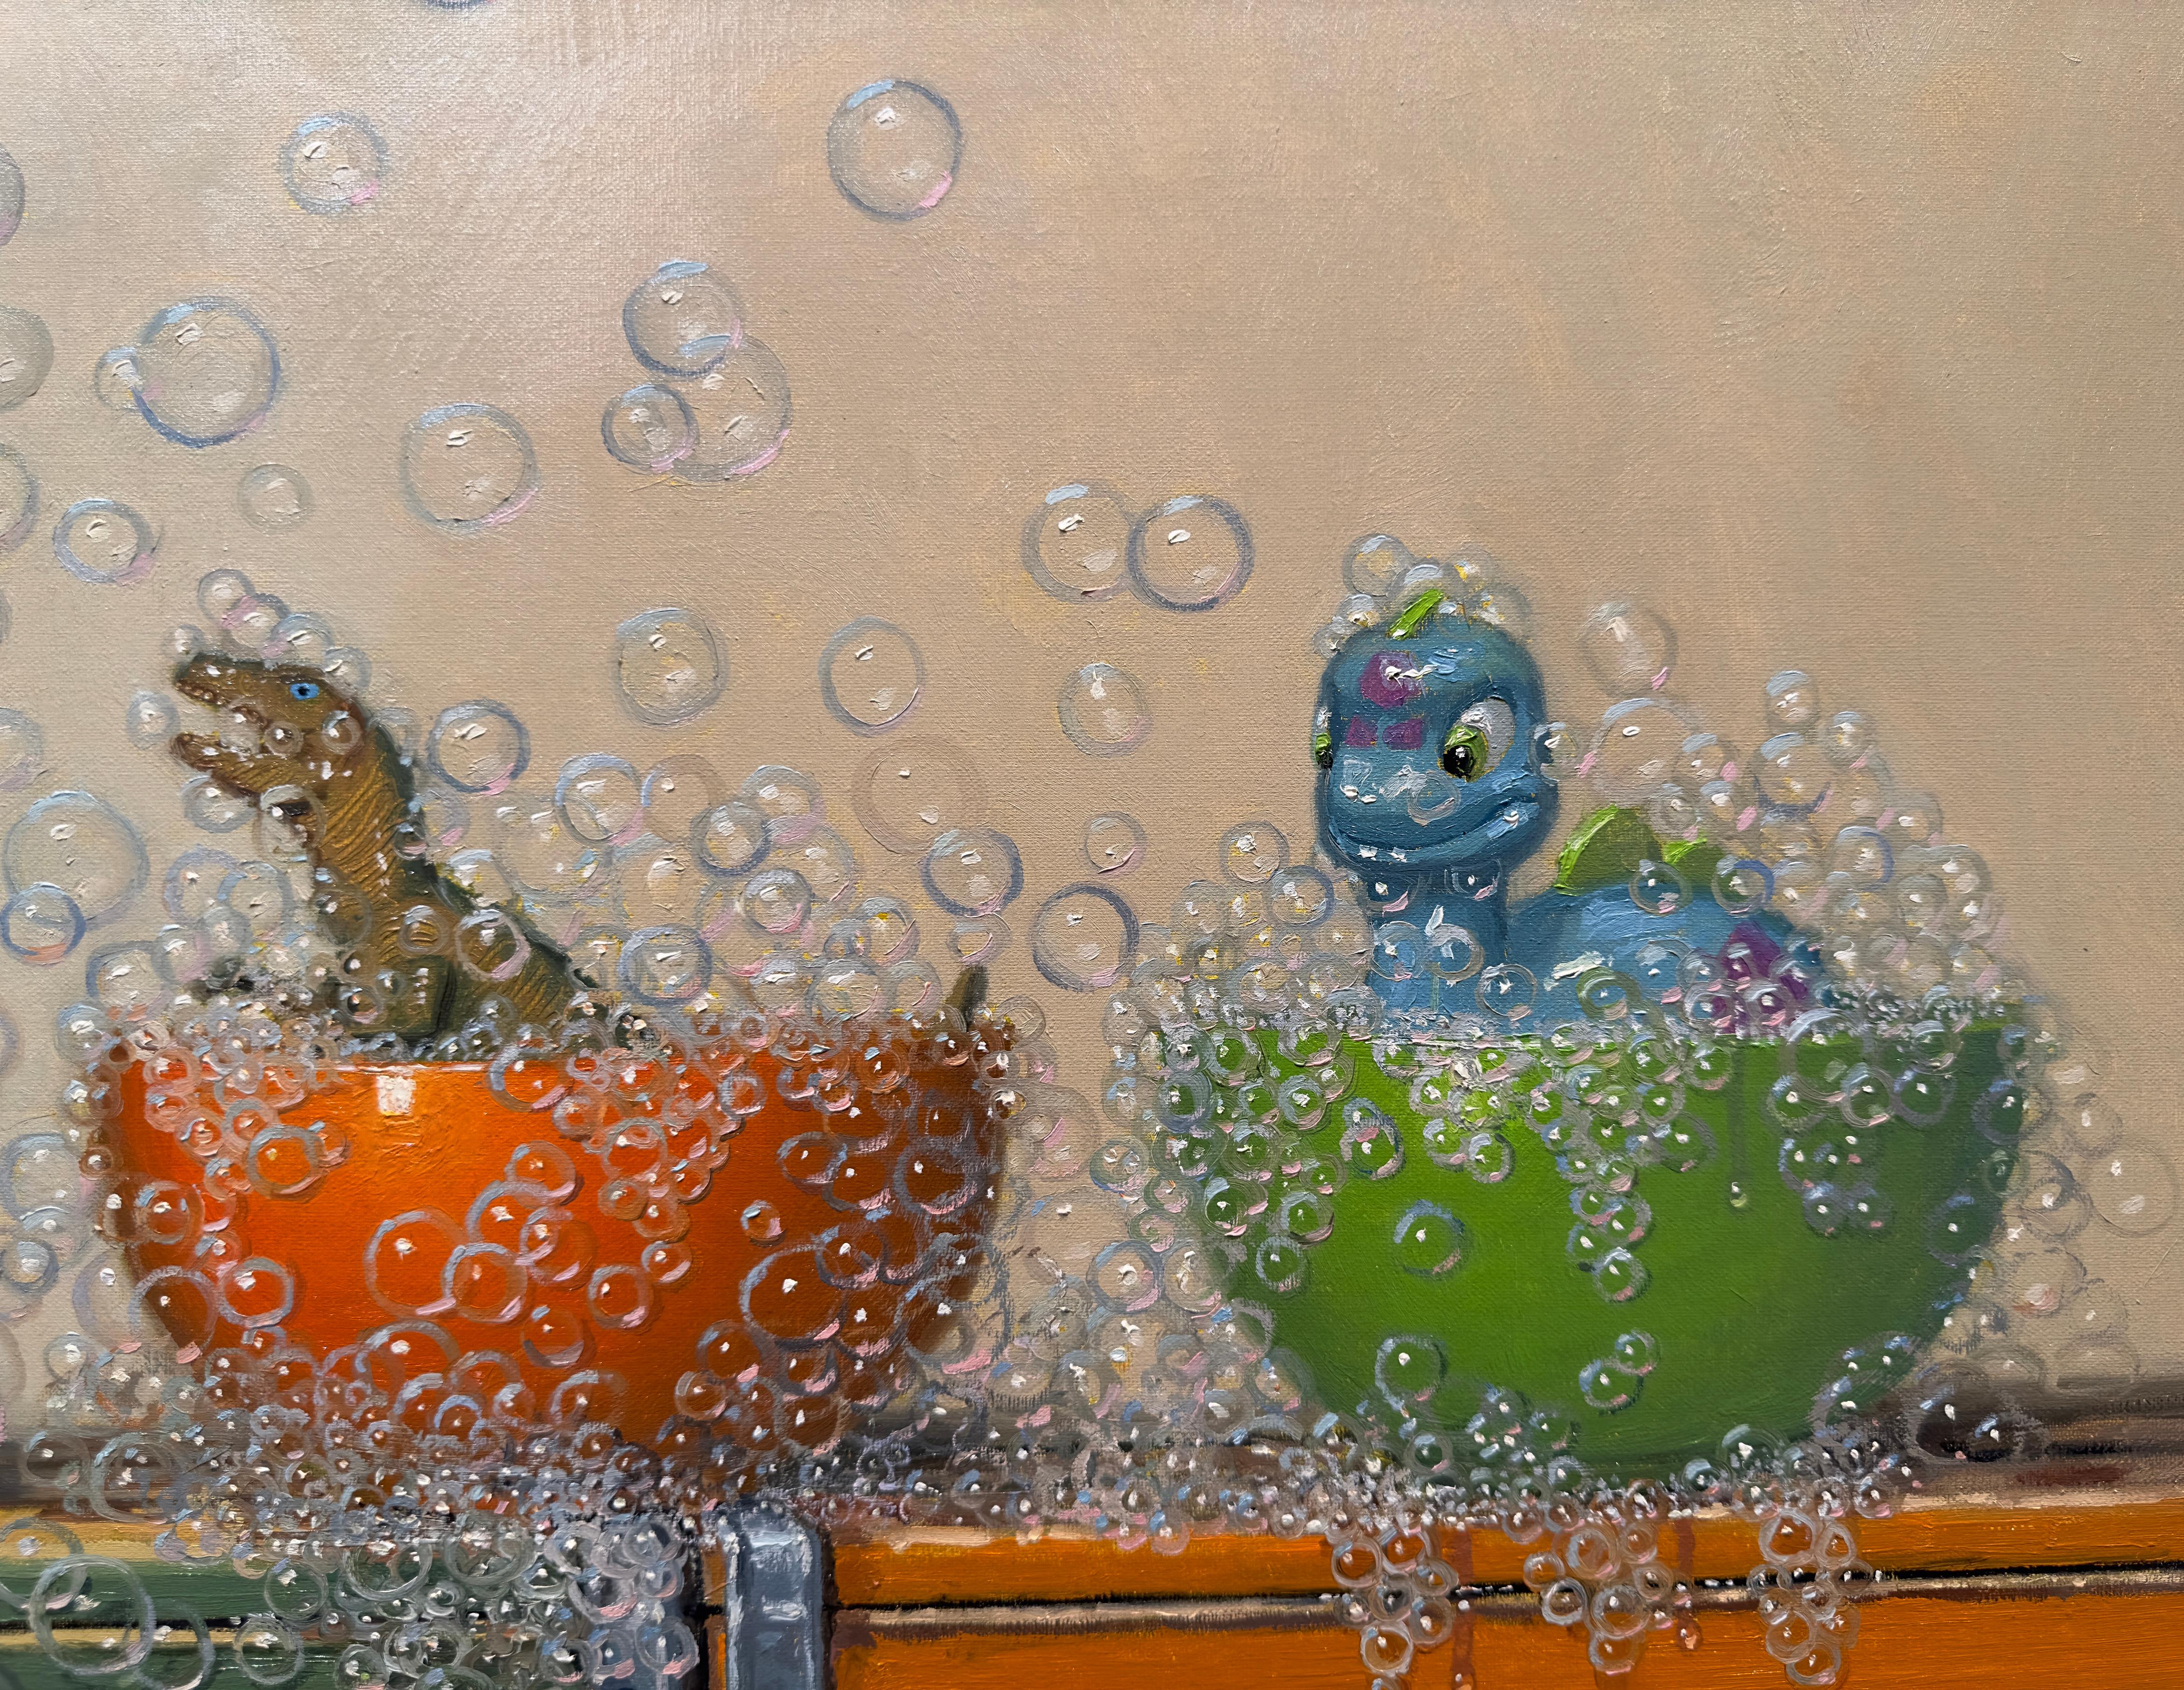 SPA DAY - Realism / Still Life / Humor / Dinosaurs / Bubbles / Children's Toys 1